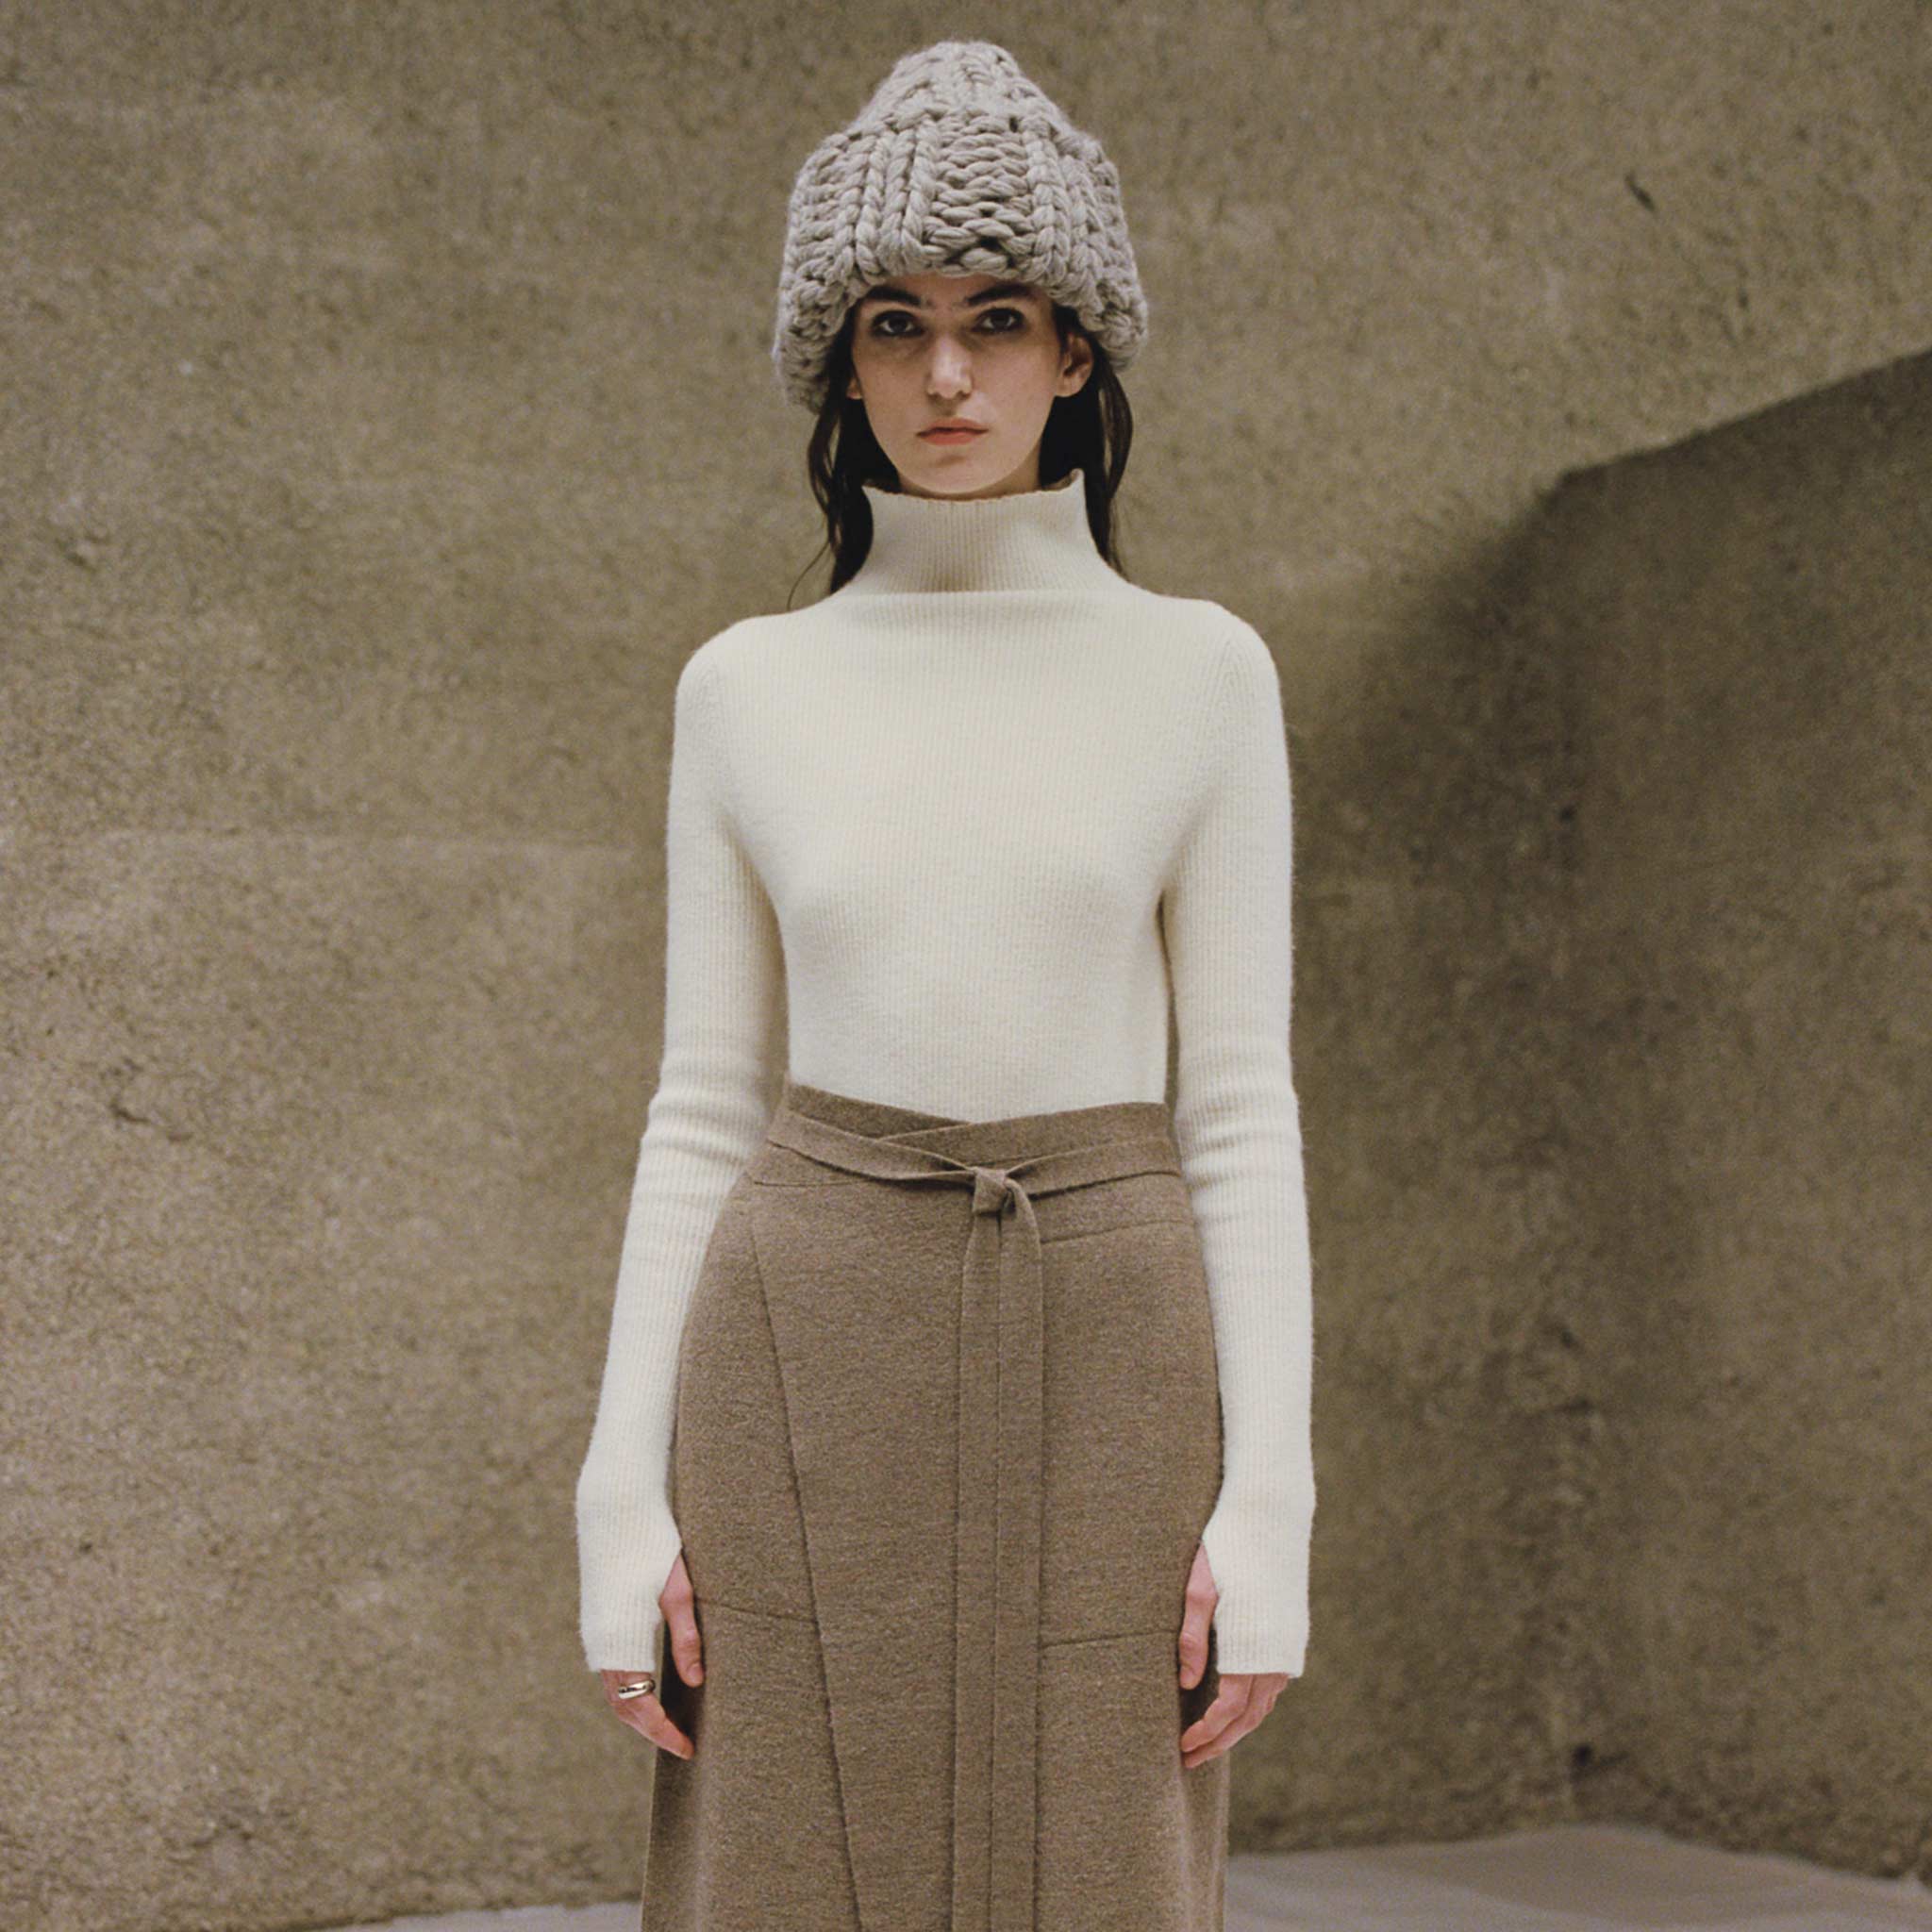 A lookbook image of a model wearing the ribbed white mockneck knit top with a wide high collar mockneck and thumb hole details at the sleeves, front view.